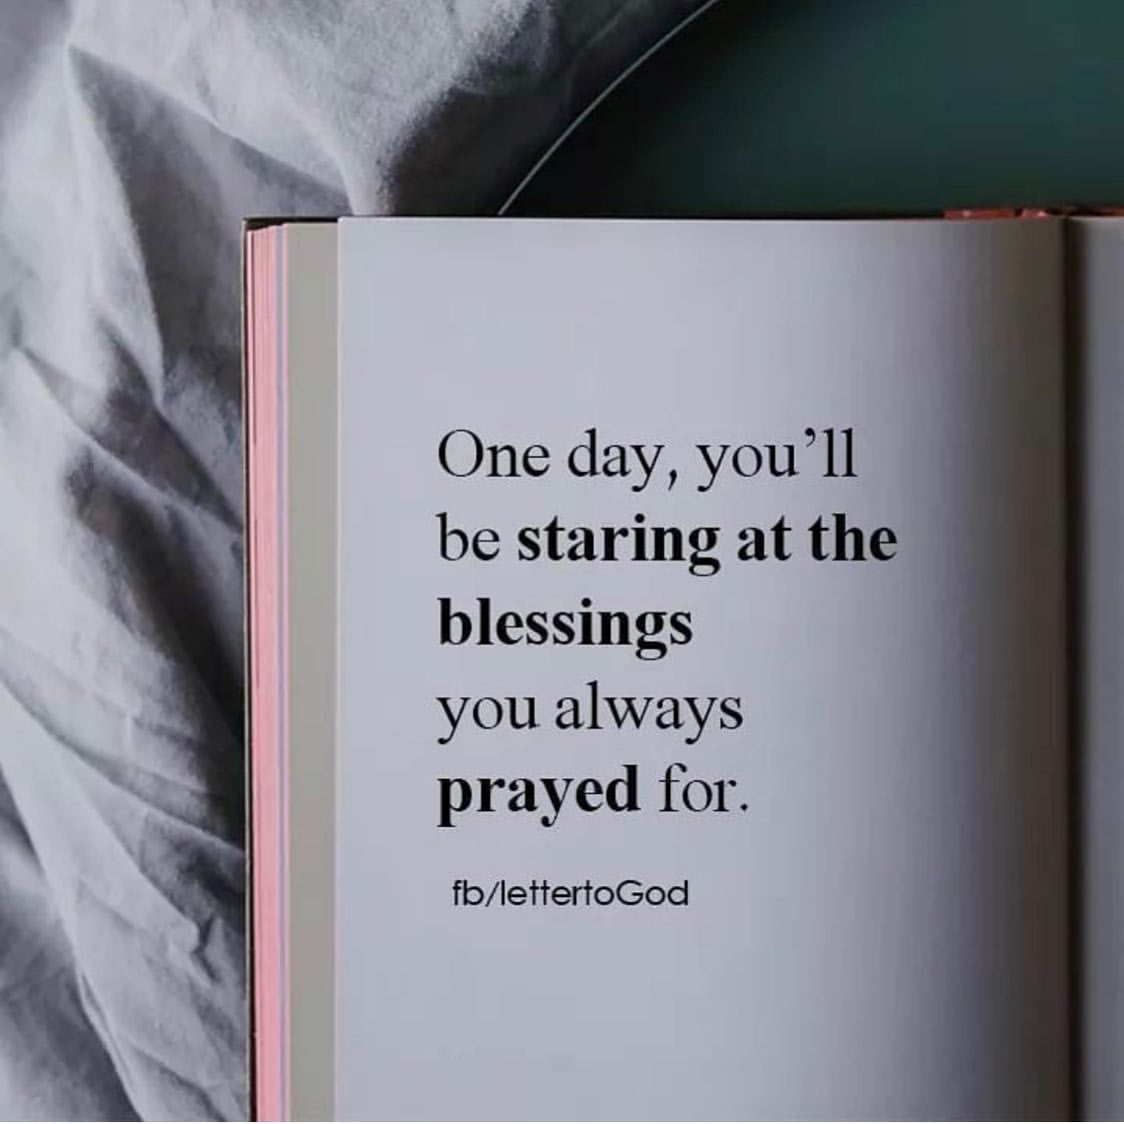 One day, you'll be staring at the blessings you always prayed for.